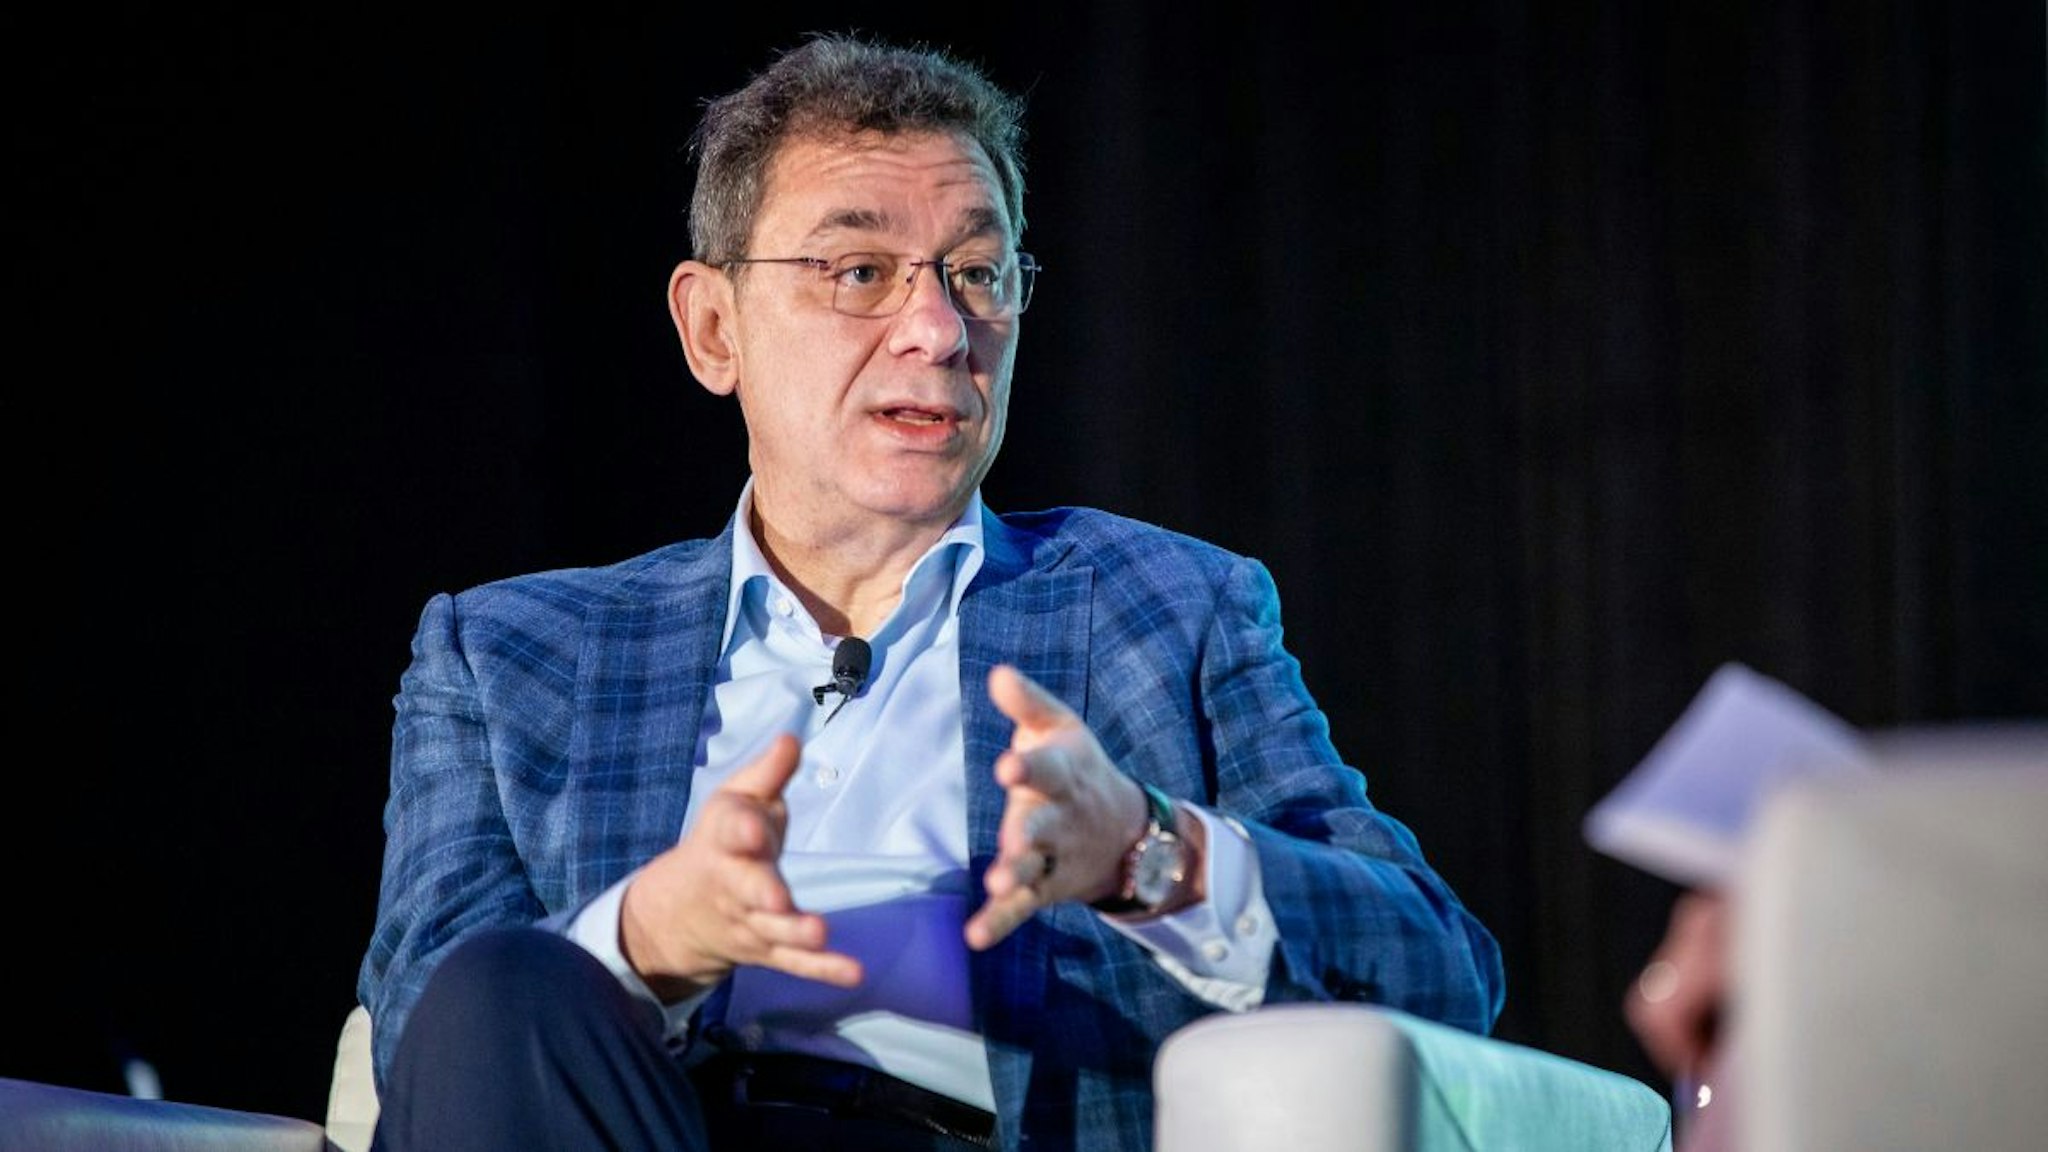 Albert Bourla, chairman and chief executive officer of Pfizer Inc., speaks during South By Southwest (SXSW) festival in Austin, Texas, U.S., on Monday, March 14, 2022.